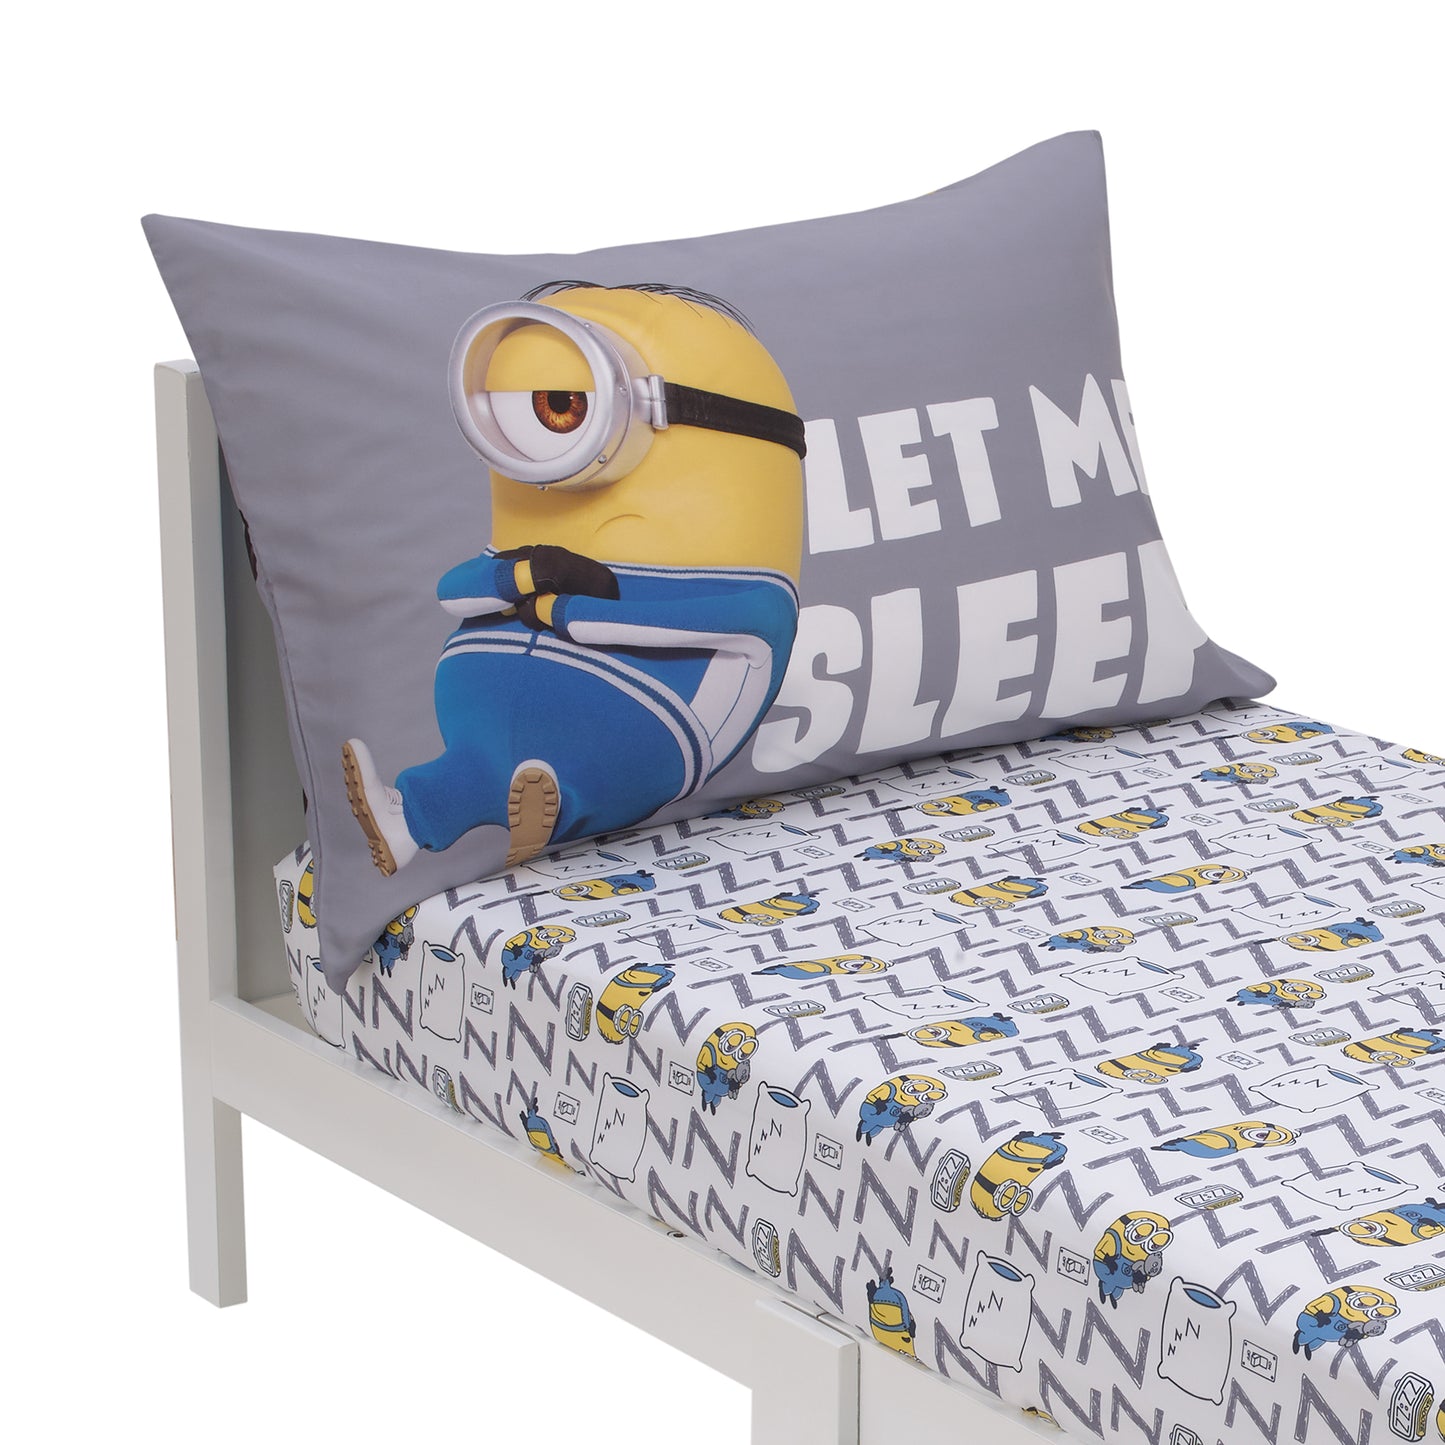 Illumination Lazy Minions Club Gray, Blue, Yellow, and White Let Me Sleep 2 Piece Toddler Sheet Set - Fitted Bottom Sheet, Reversible Pillowcase